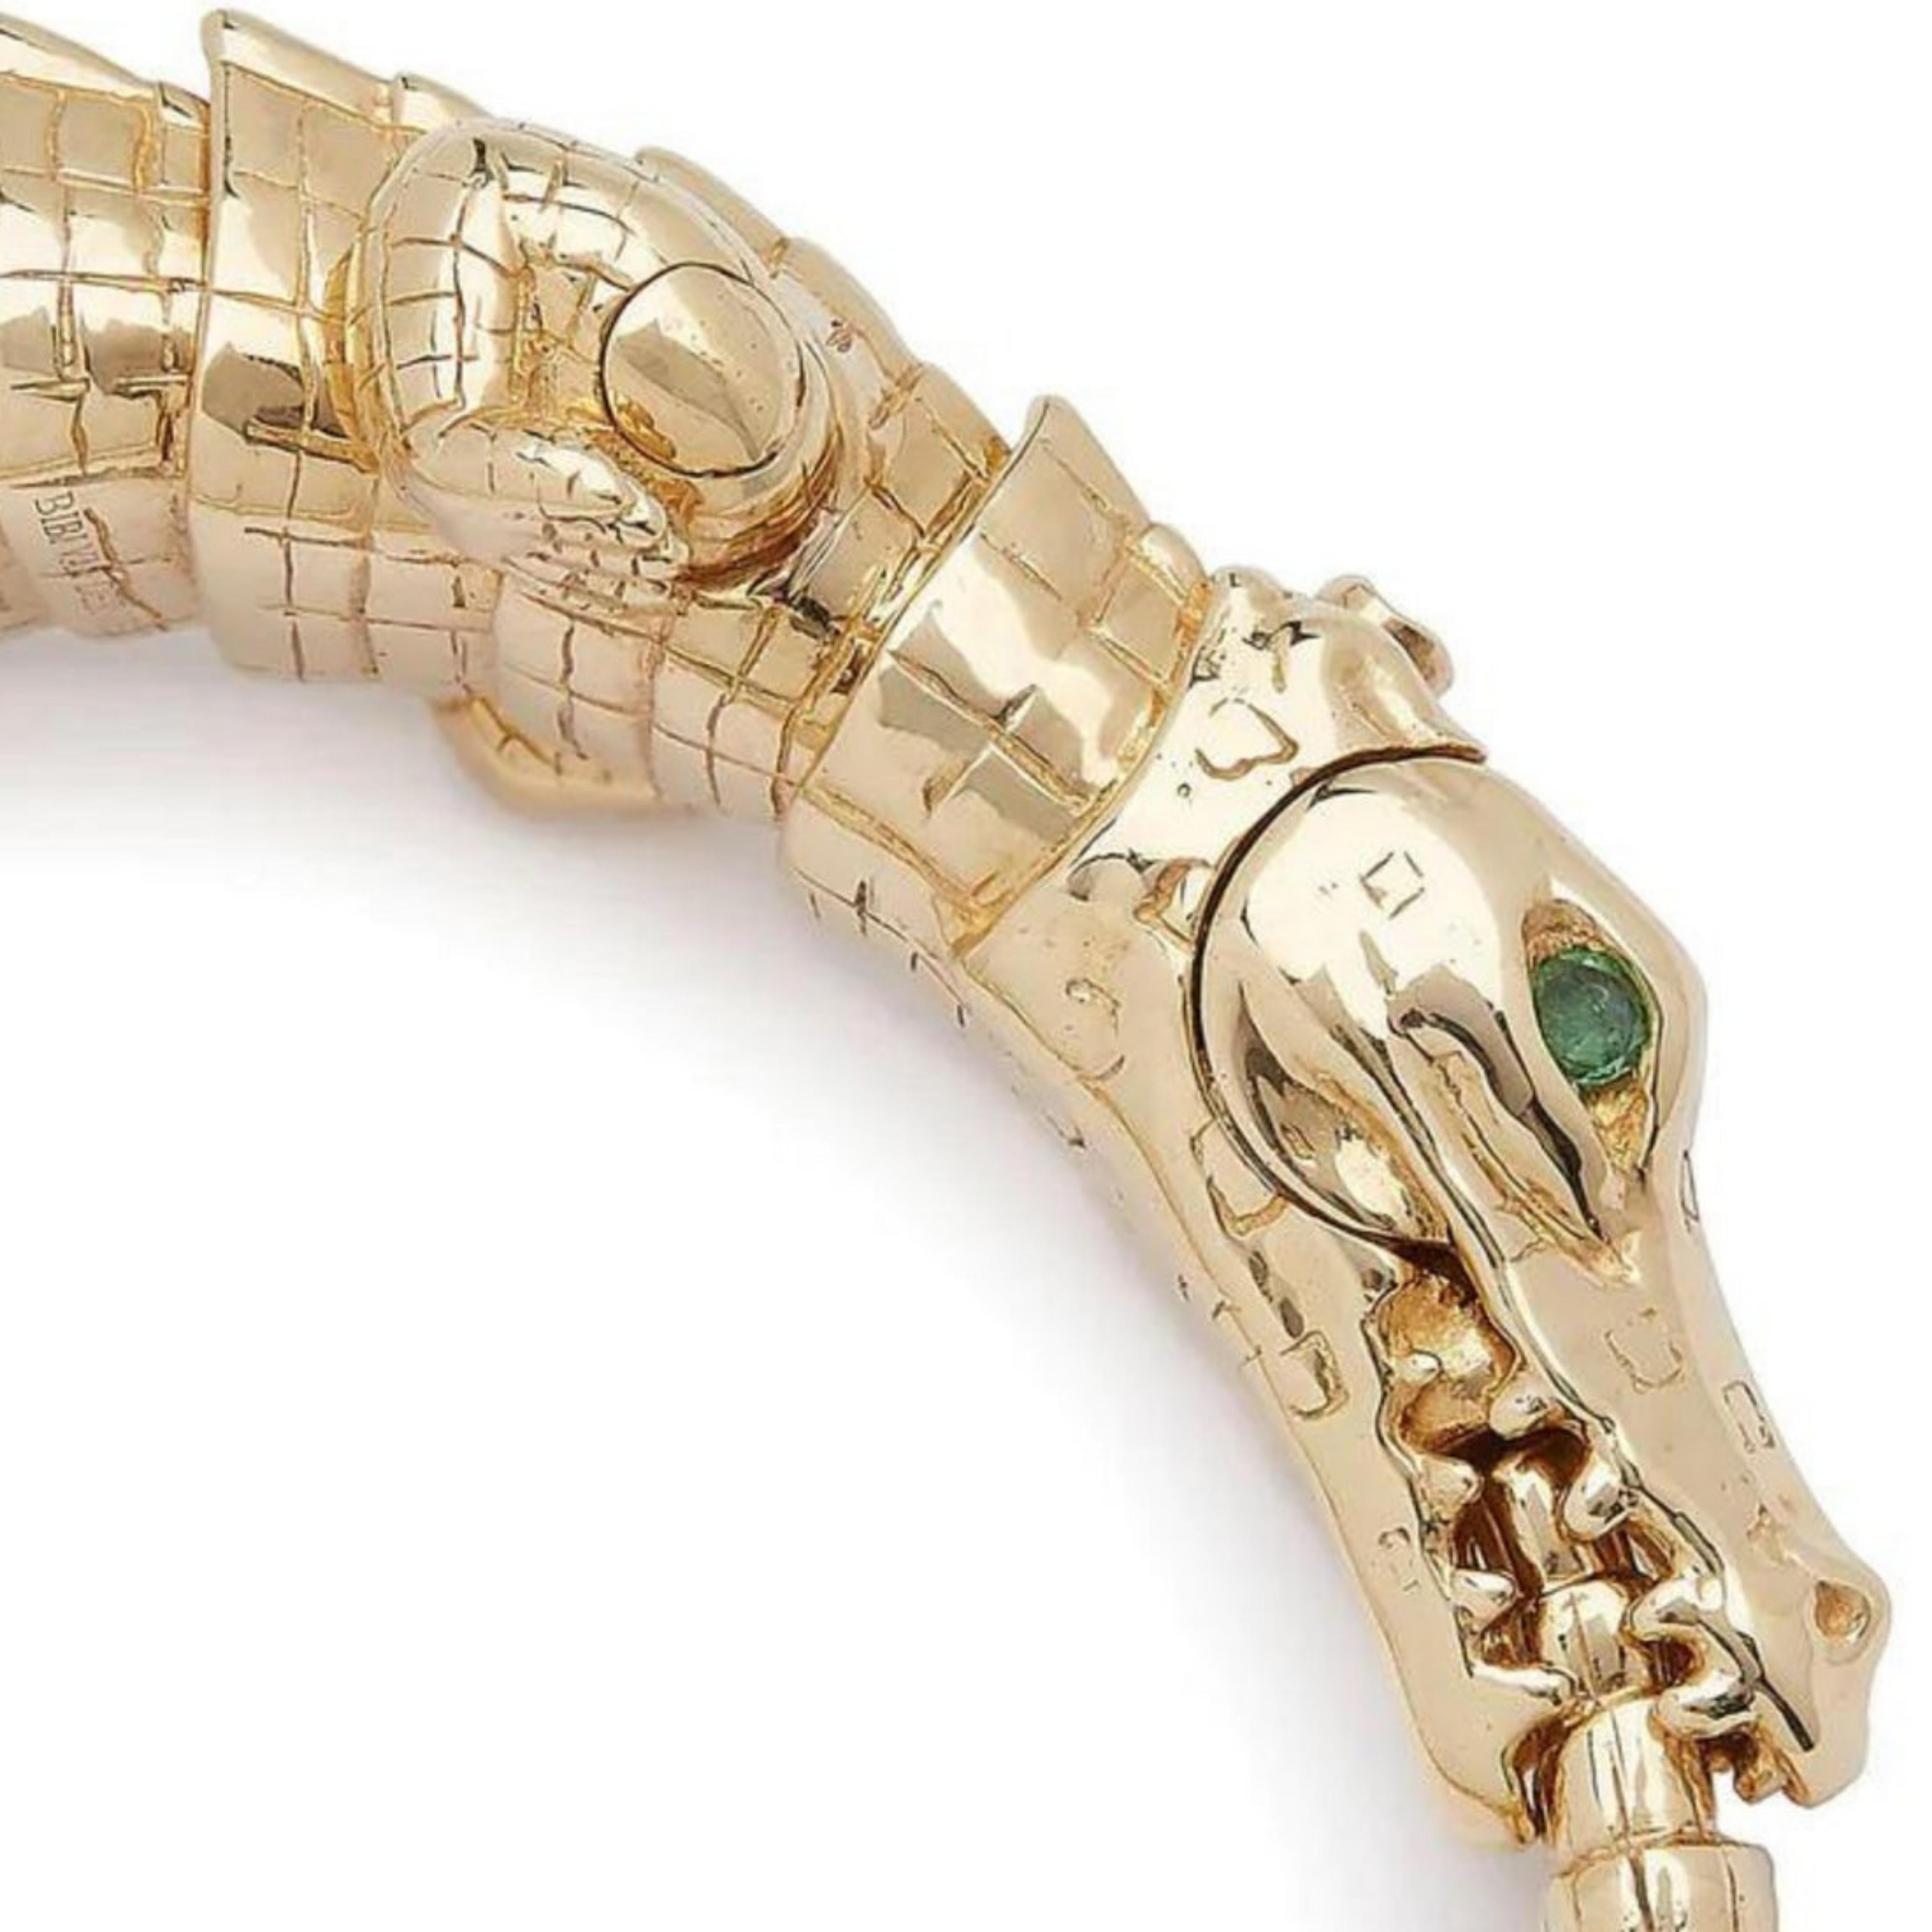 Bibi van der Velden Alligator Wrap Bracelet. A high fine jewelry piece of the most amazing quality and detail. This photo shows the entire 18K gold bracelet with tsavorite eye details from the side view. It includes detailed scales, carved legs and fluid internal pieces to make the bracelet curve perfect across the wrist.